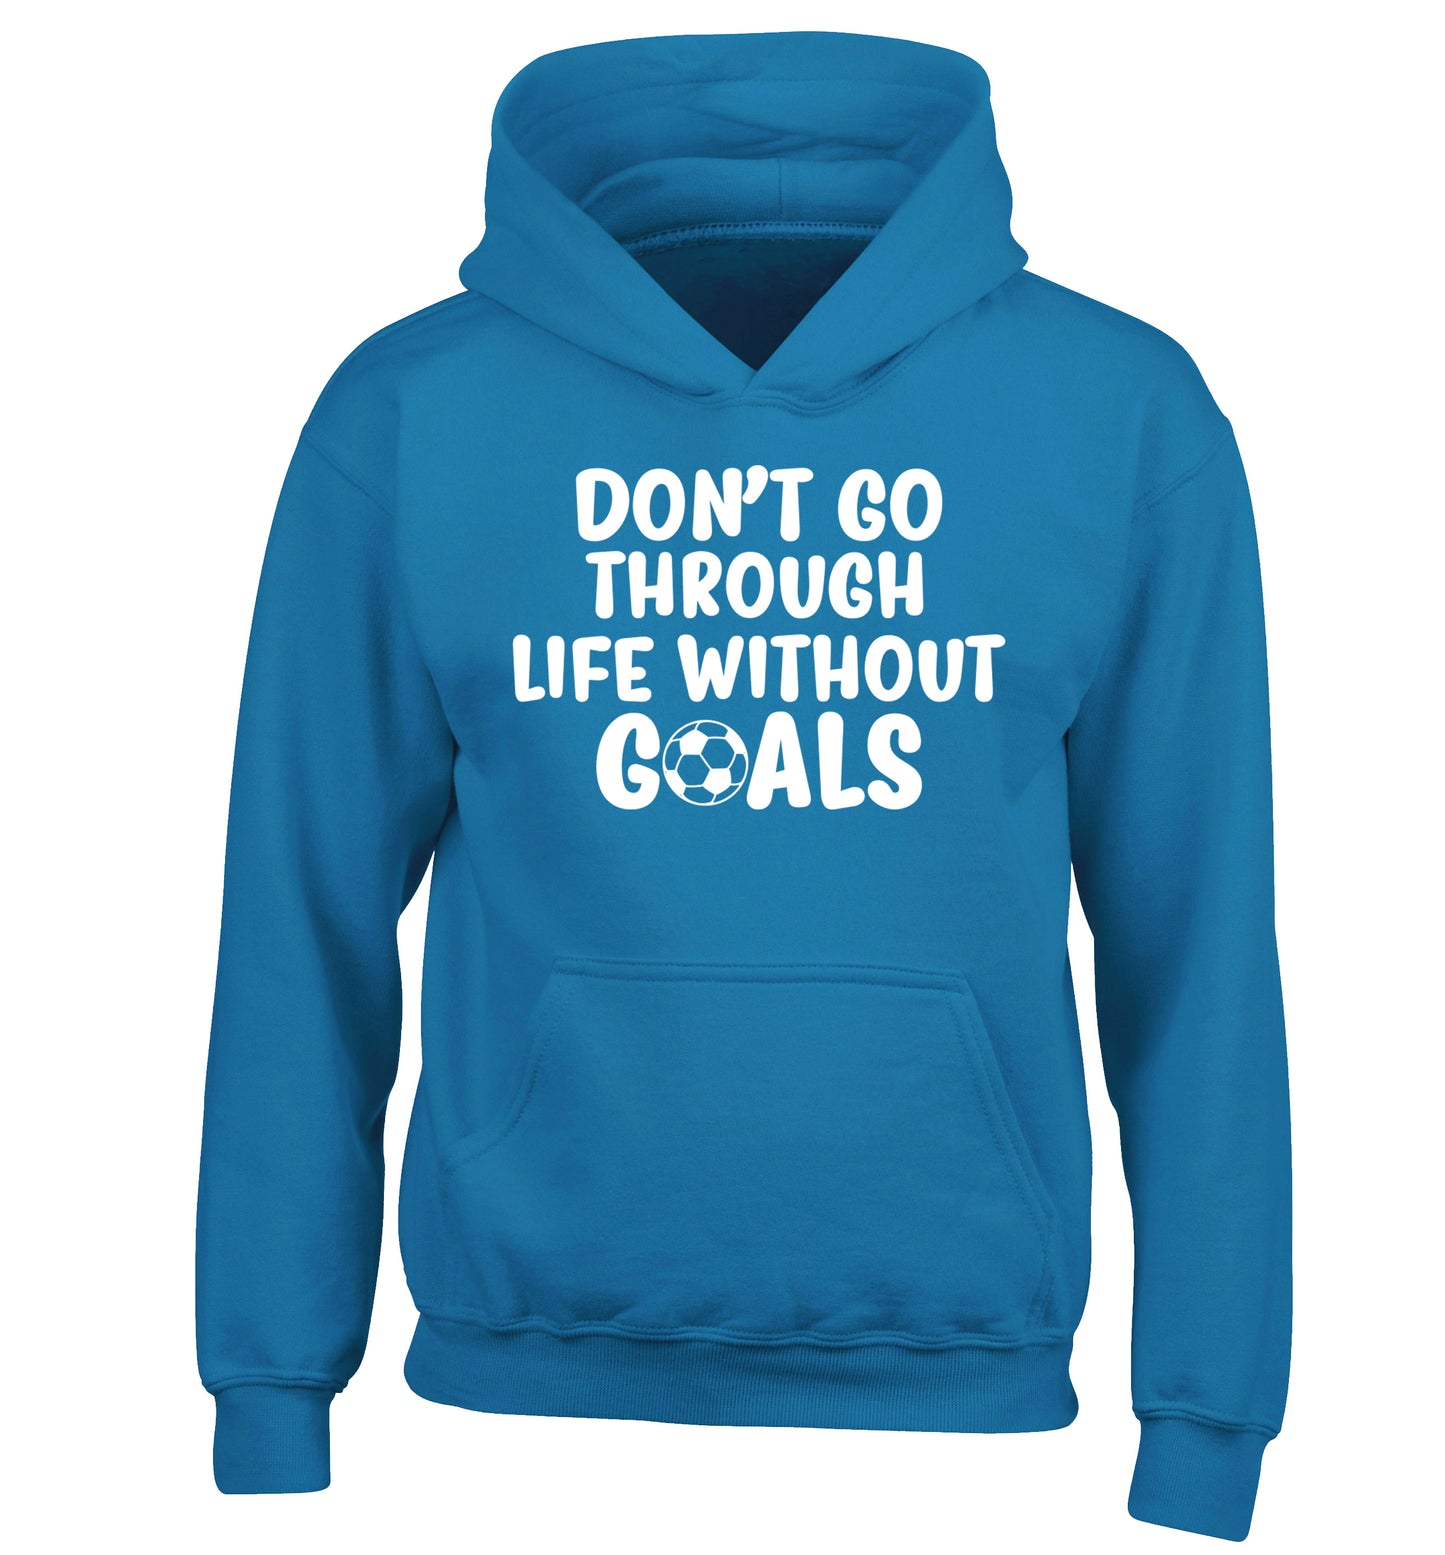 Don't go through life without goals children's blue hoodie 12-14 Years